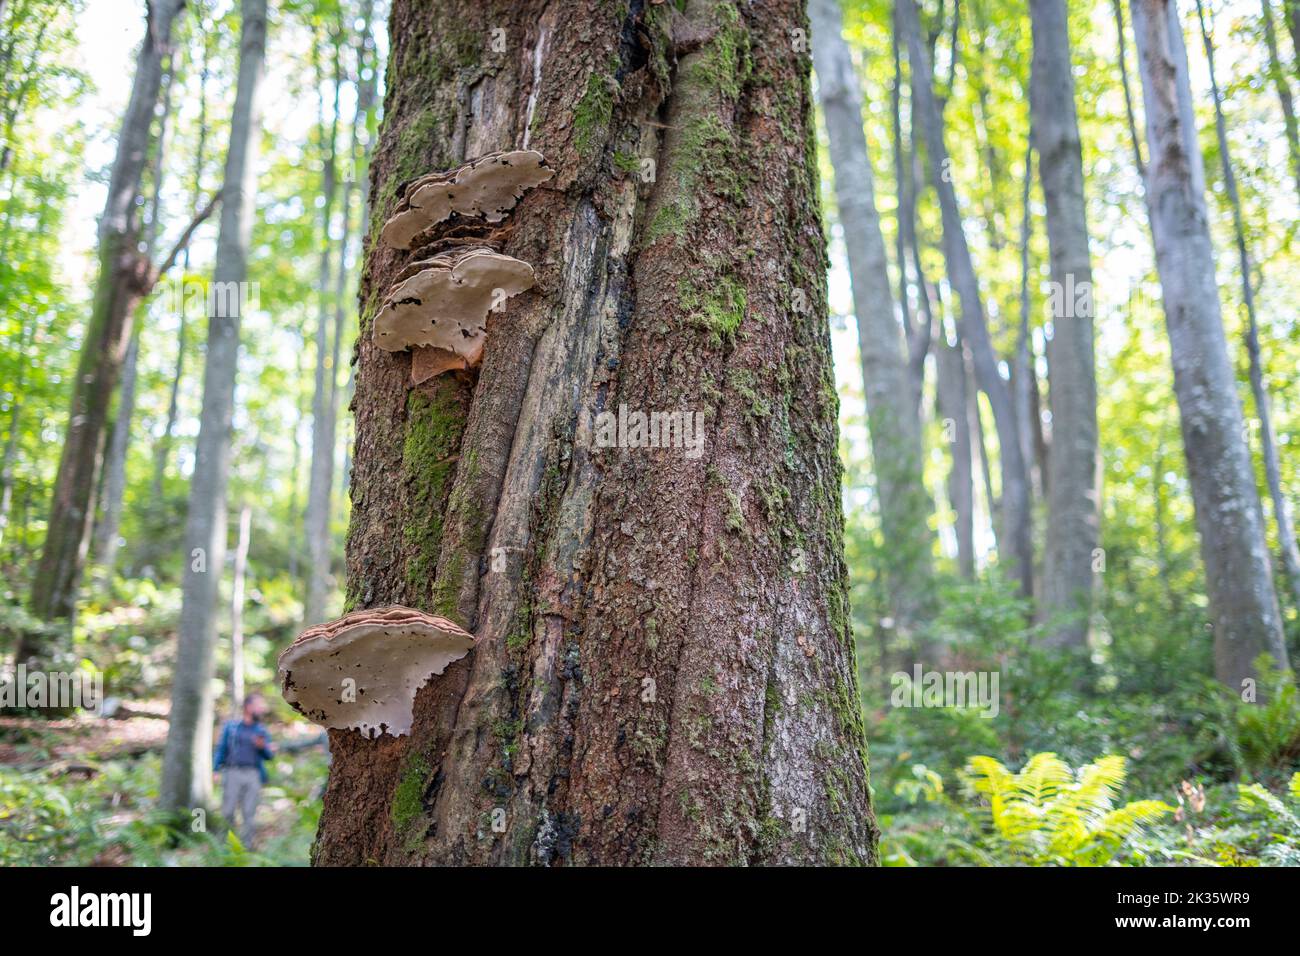 A wood mushroom on the tree bark with blurred hiker in the background. Parasitic fungus on a tree. Stock Photo